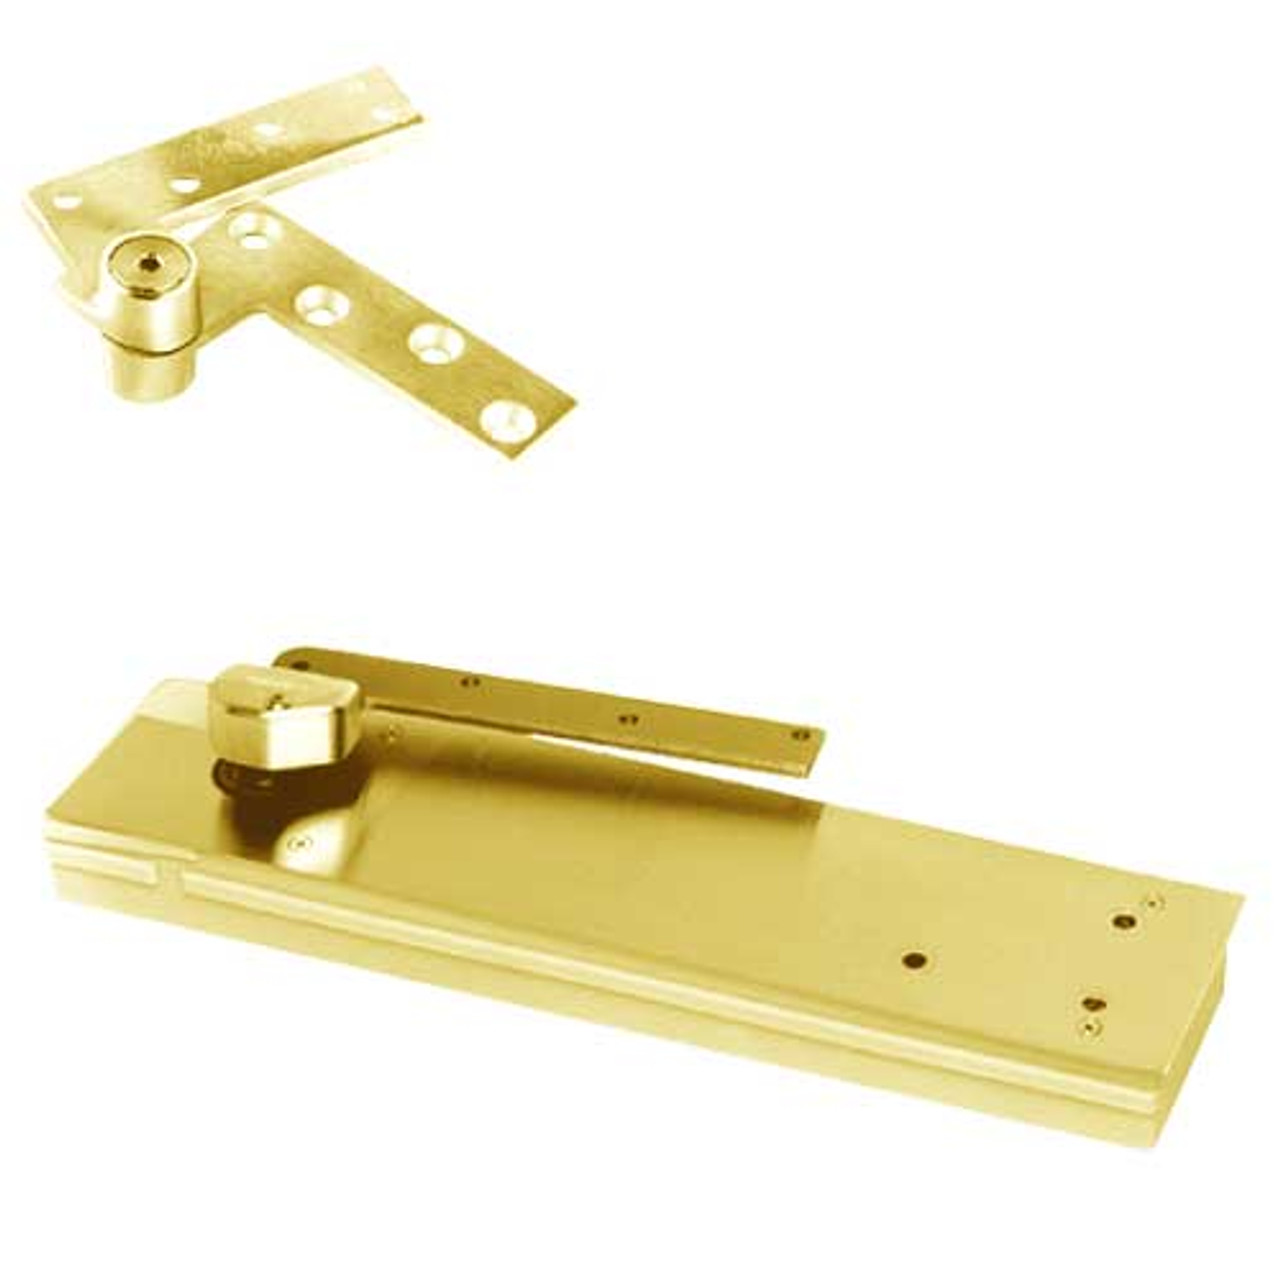 5104ABC105-1-1/2OS-LH-605 Rixson 51 Series 1-1/2" Offset Hung Shallow Depth Floor Closers in Bright Brass Finish